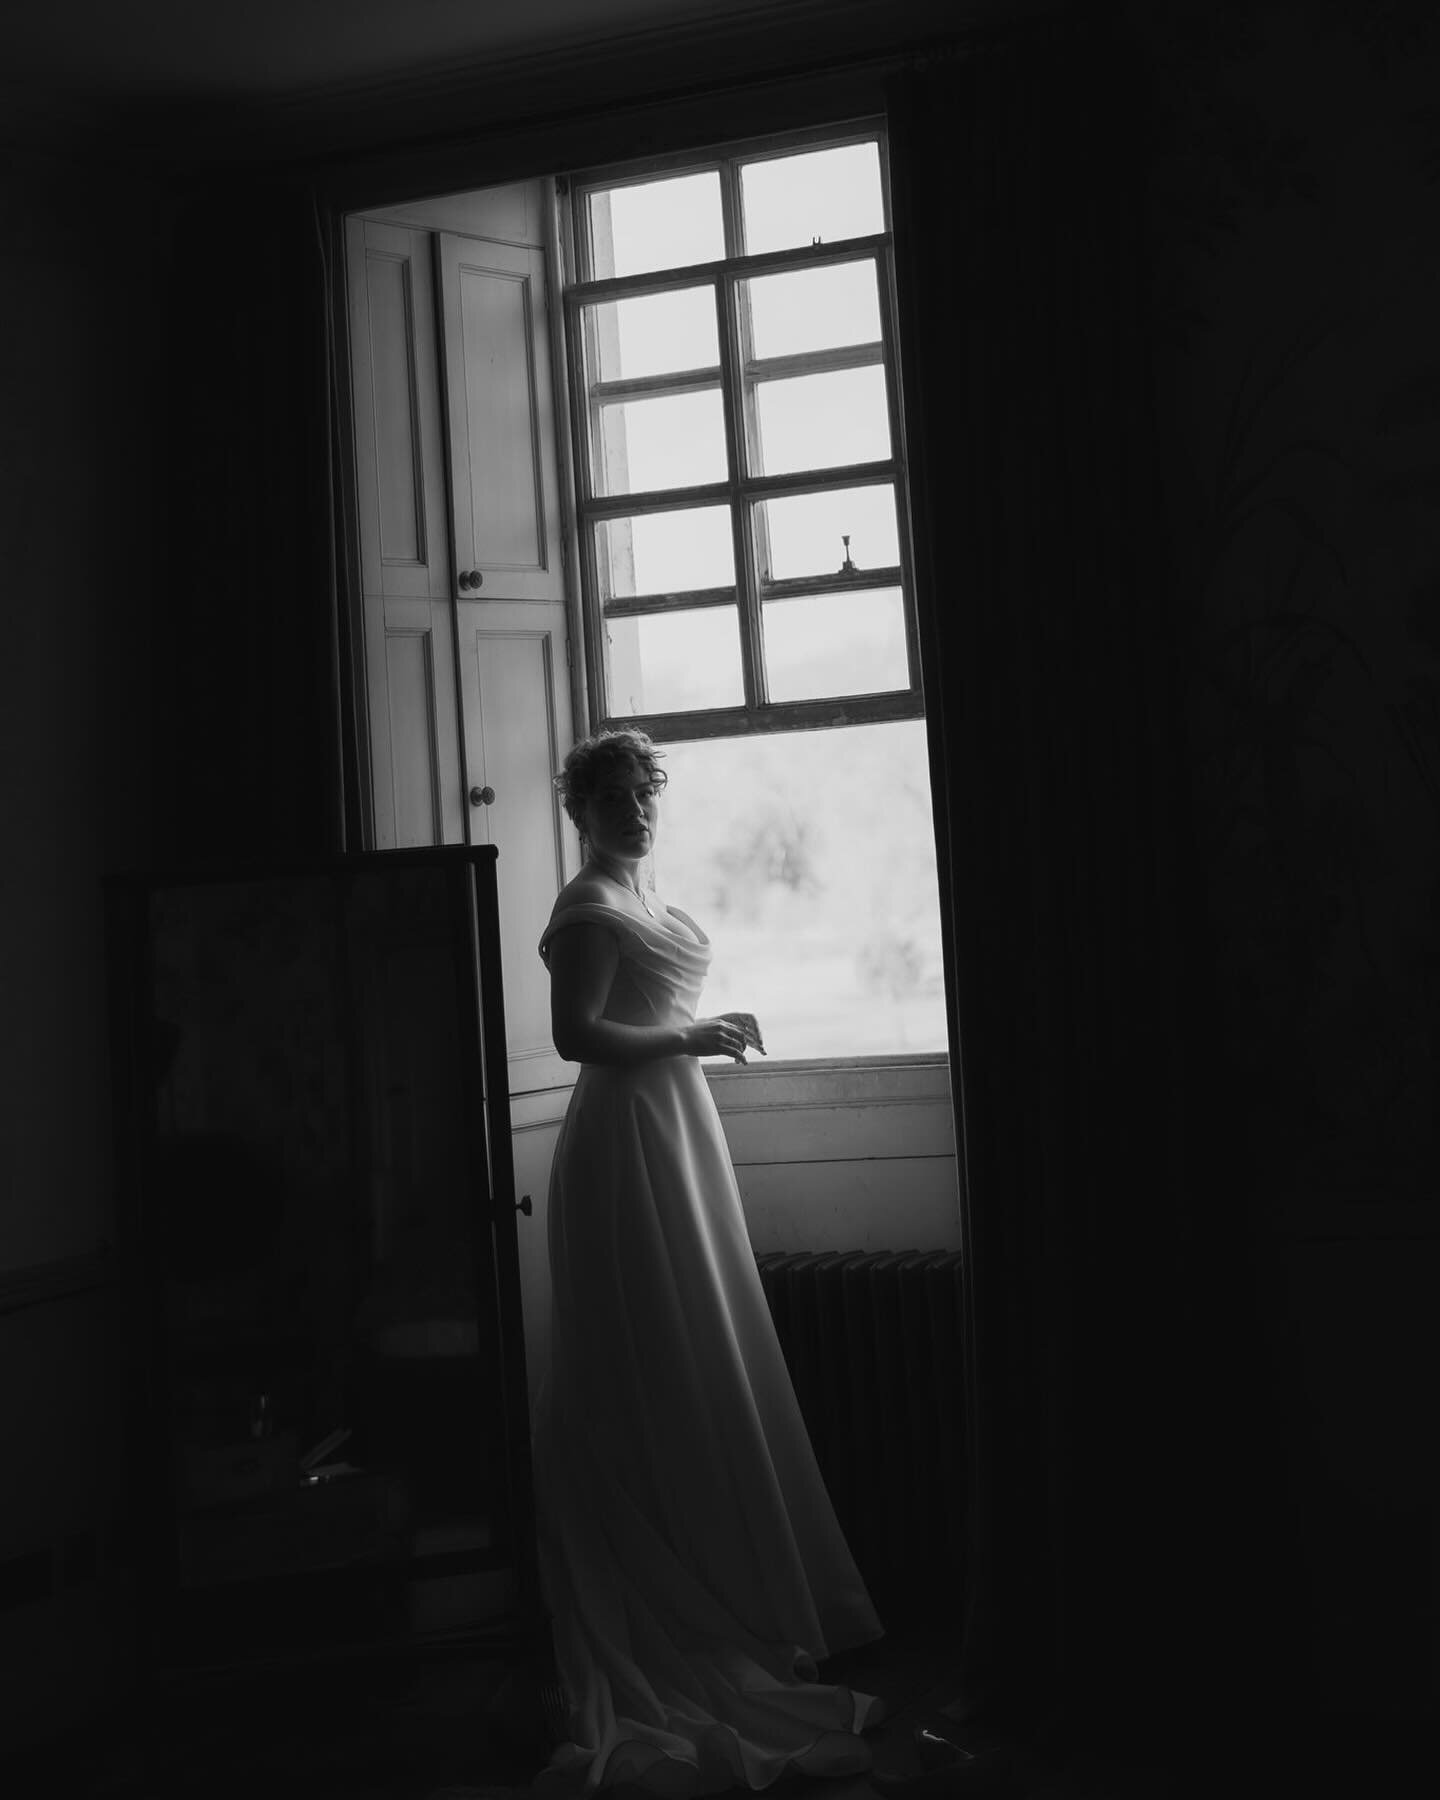 Glimpses of the morning at St. Giles house 

Josie looked incredible in her @justinalexander wedding gown from @bridesofsouthampton1976 
Venue: @stgileshouseweddings 
@stgileshouse 
Video: @agneharrisfilms 
MUA: @laurenomua 
Catering: @_nouriish._ 
D